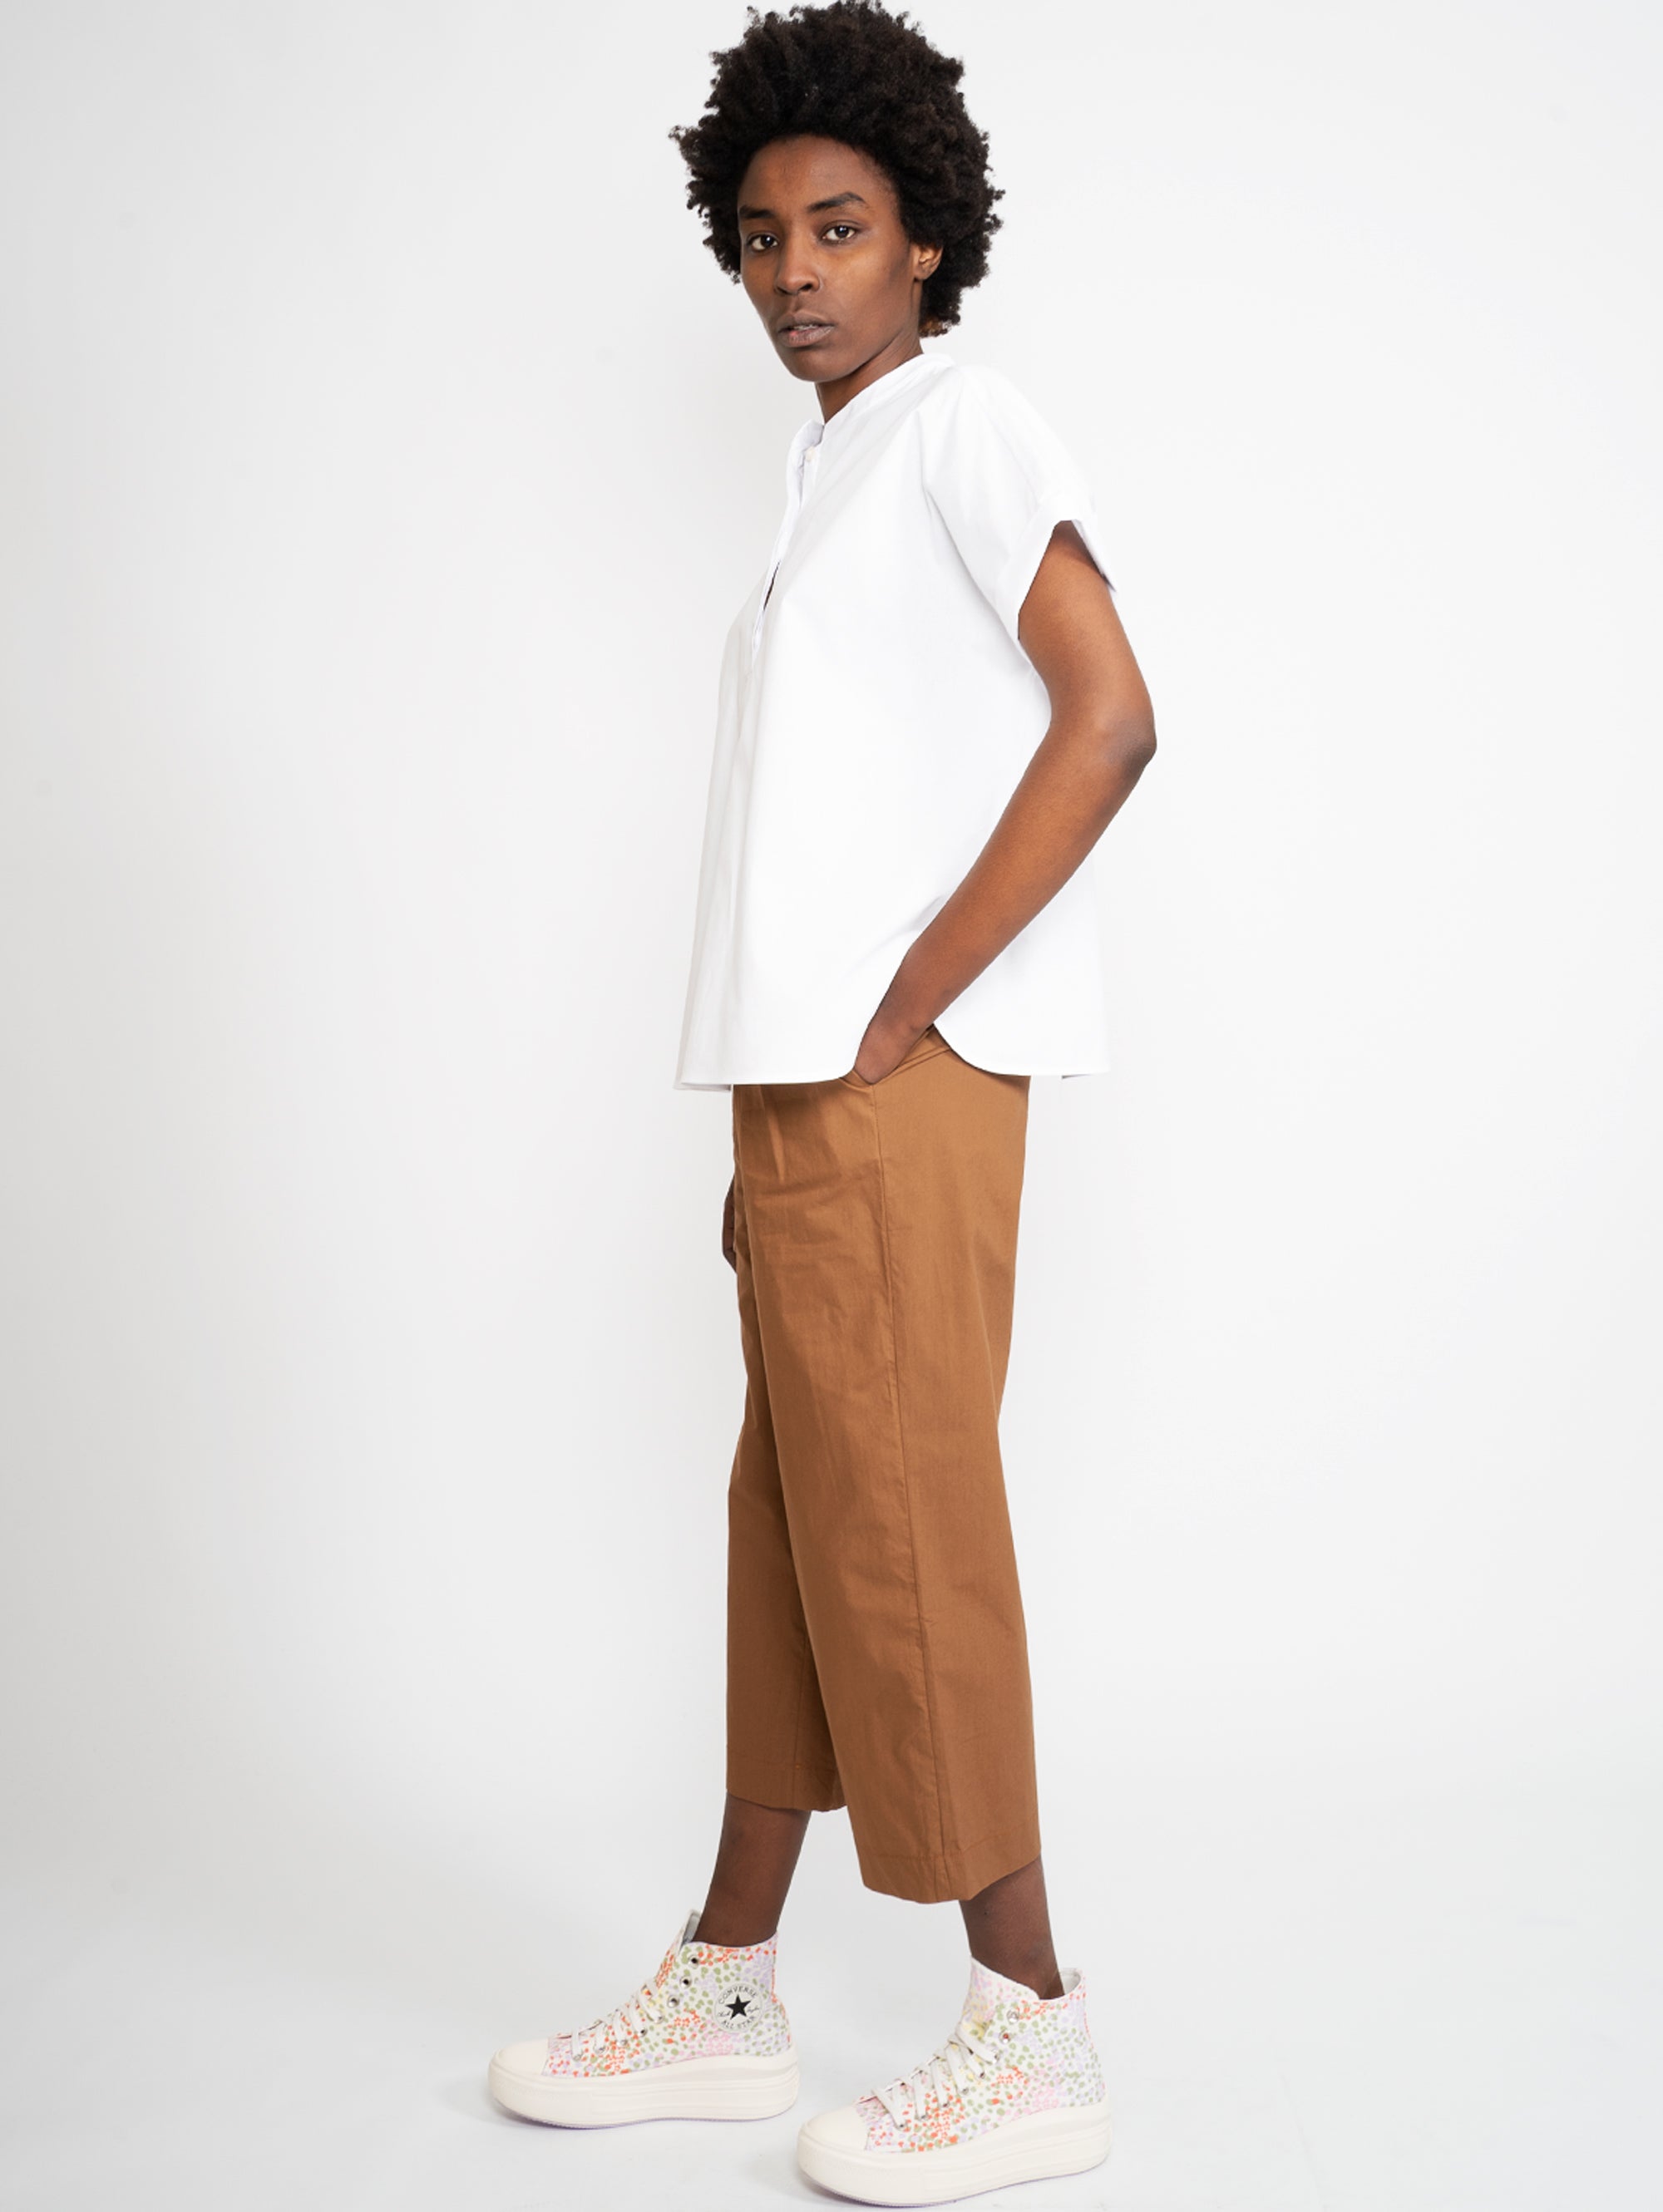 Trousers with Brown Pences